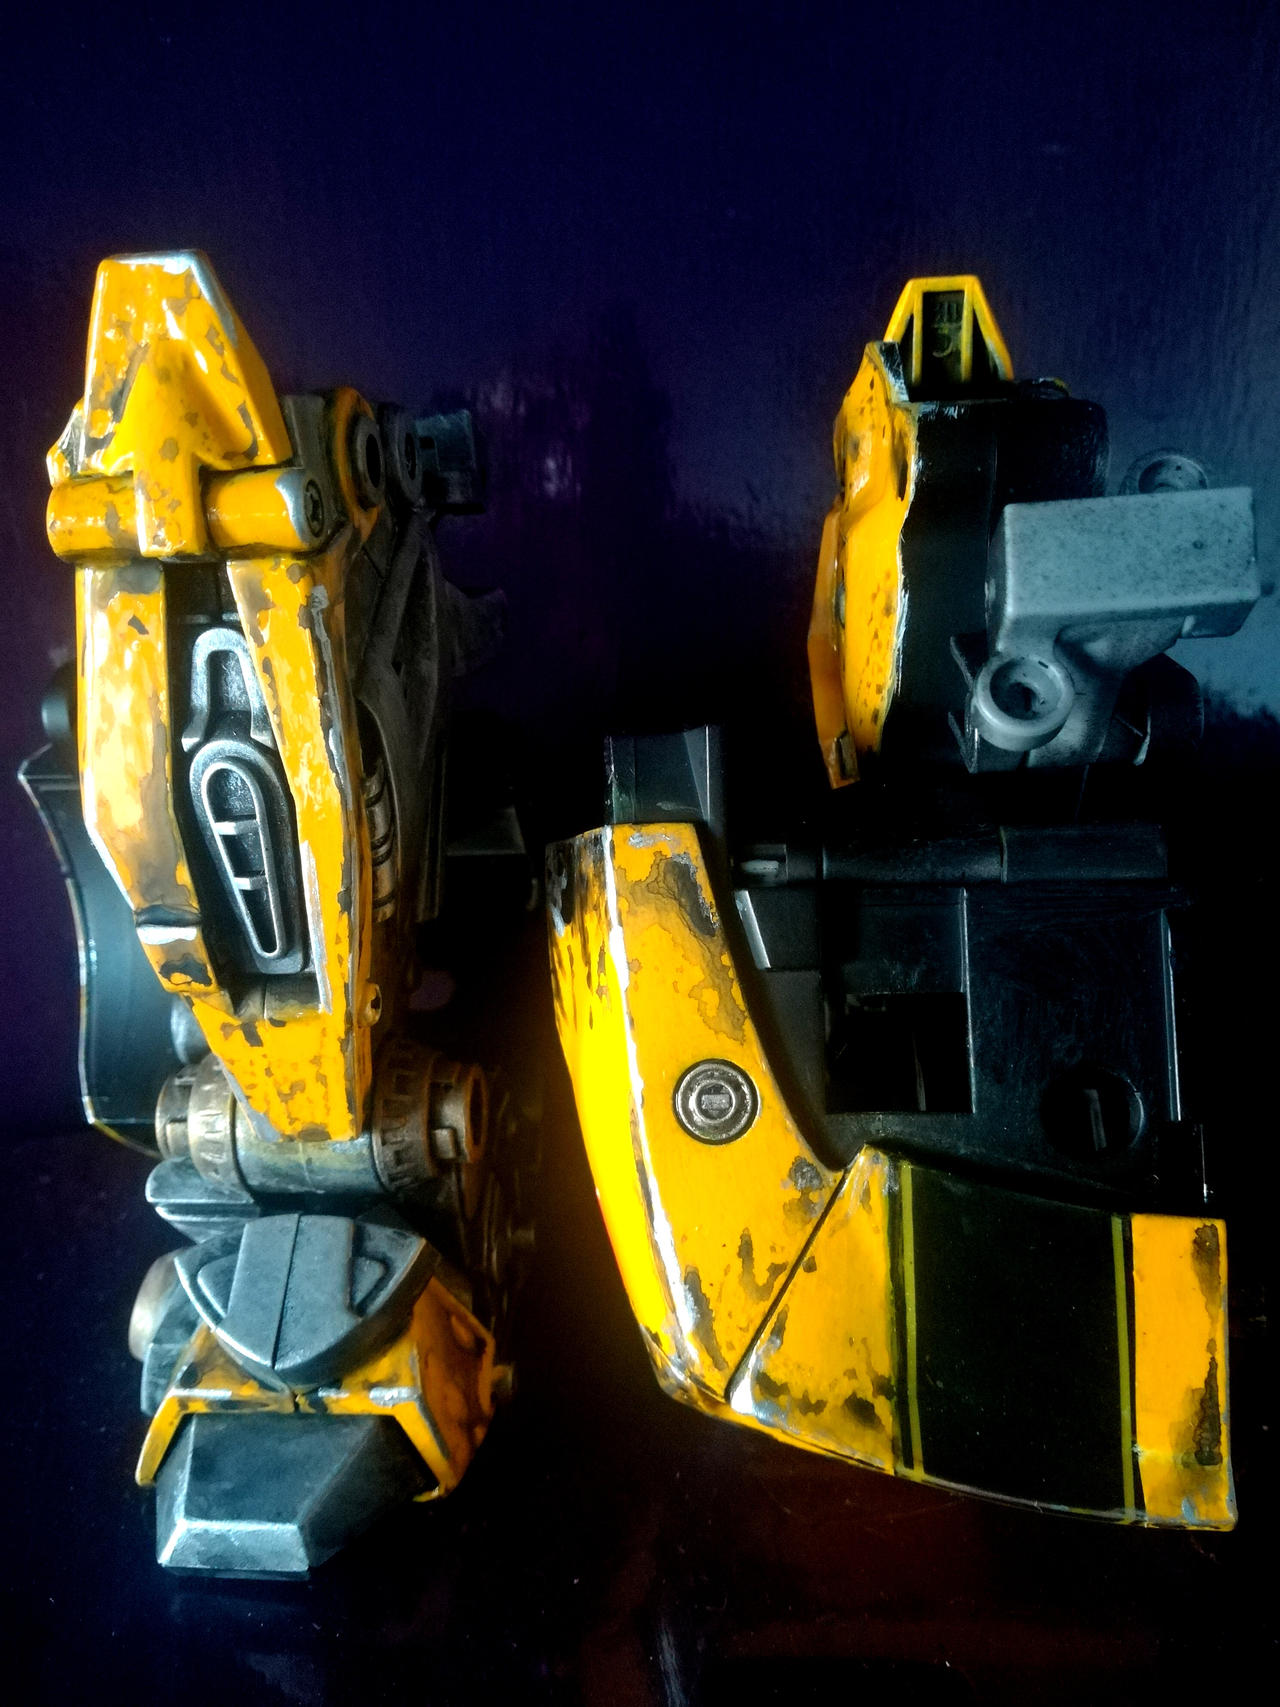 Transformers ultimate bumblebee repaint by lin by litofernandez on